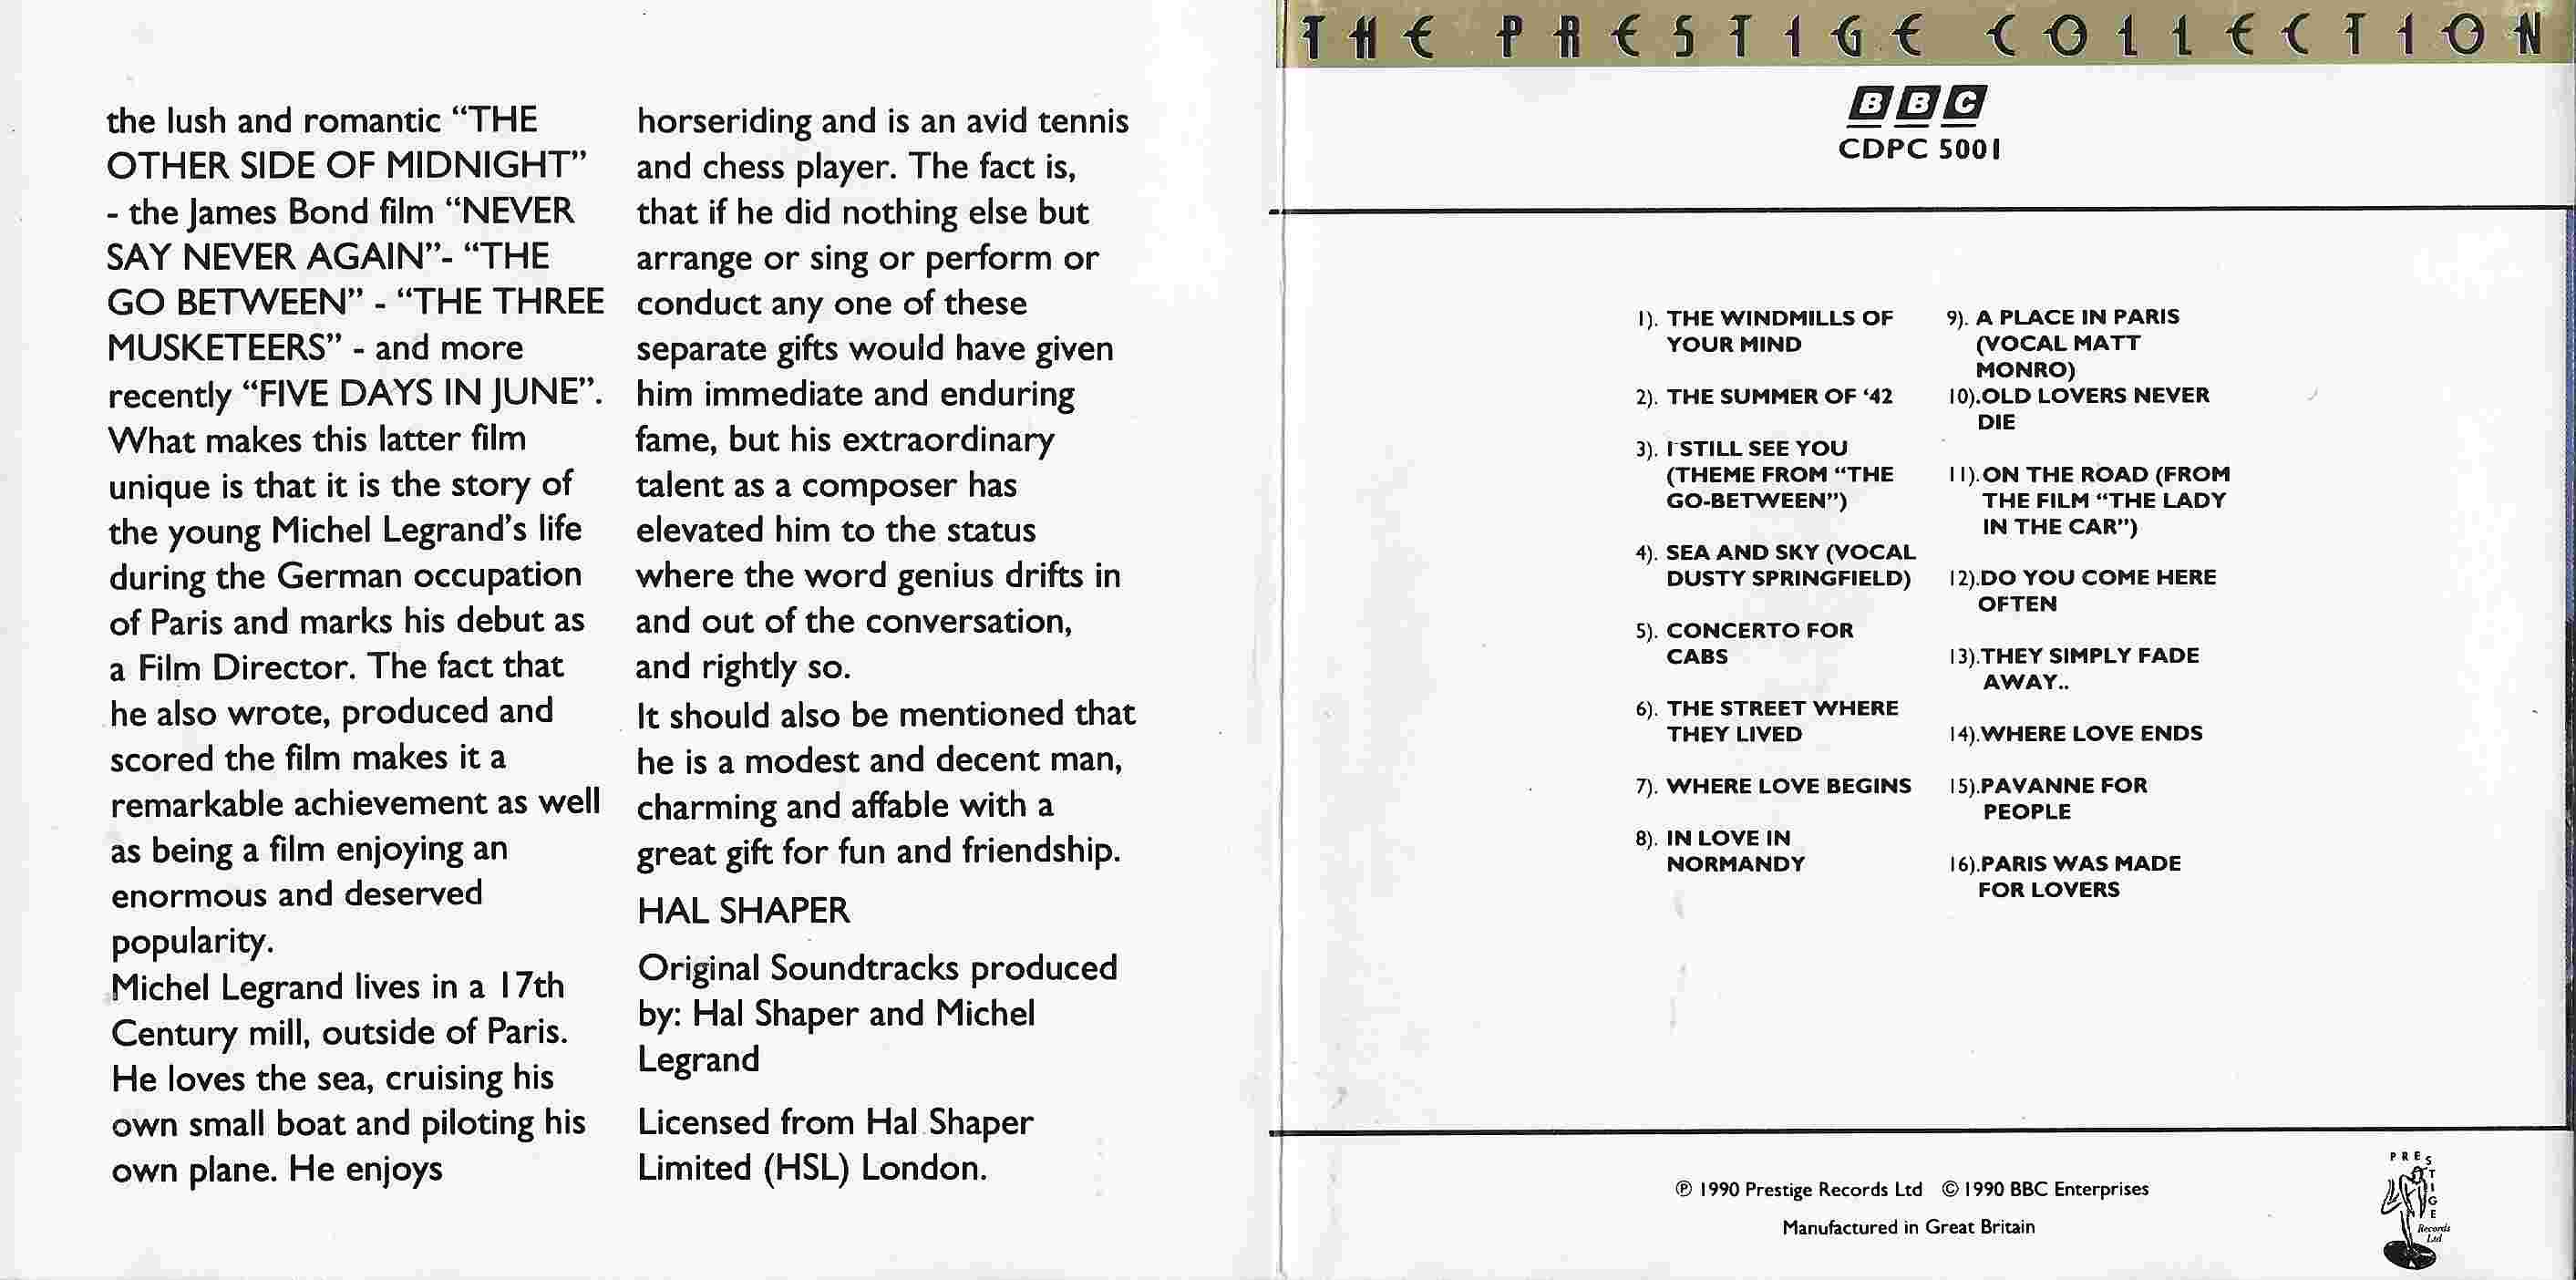 Middle of cover of CDPC 5001